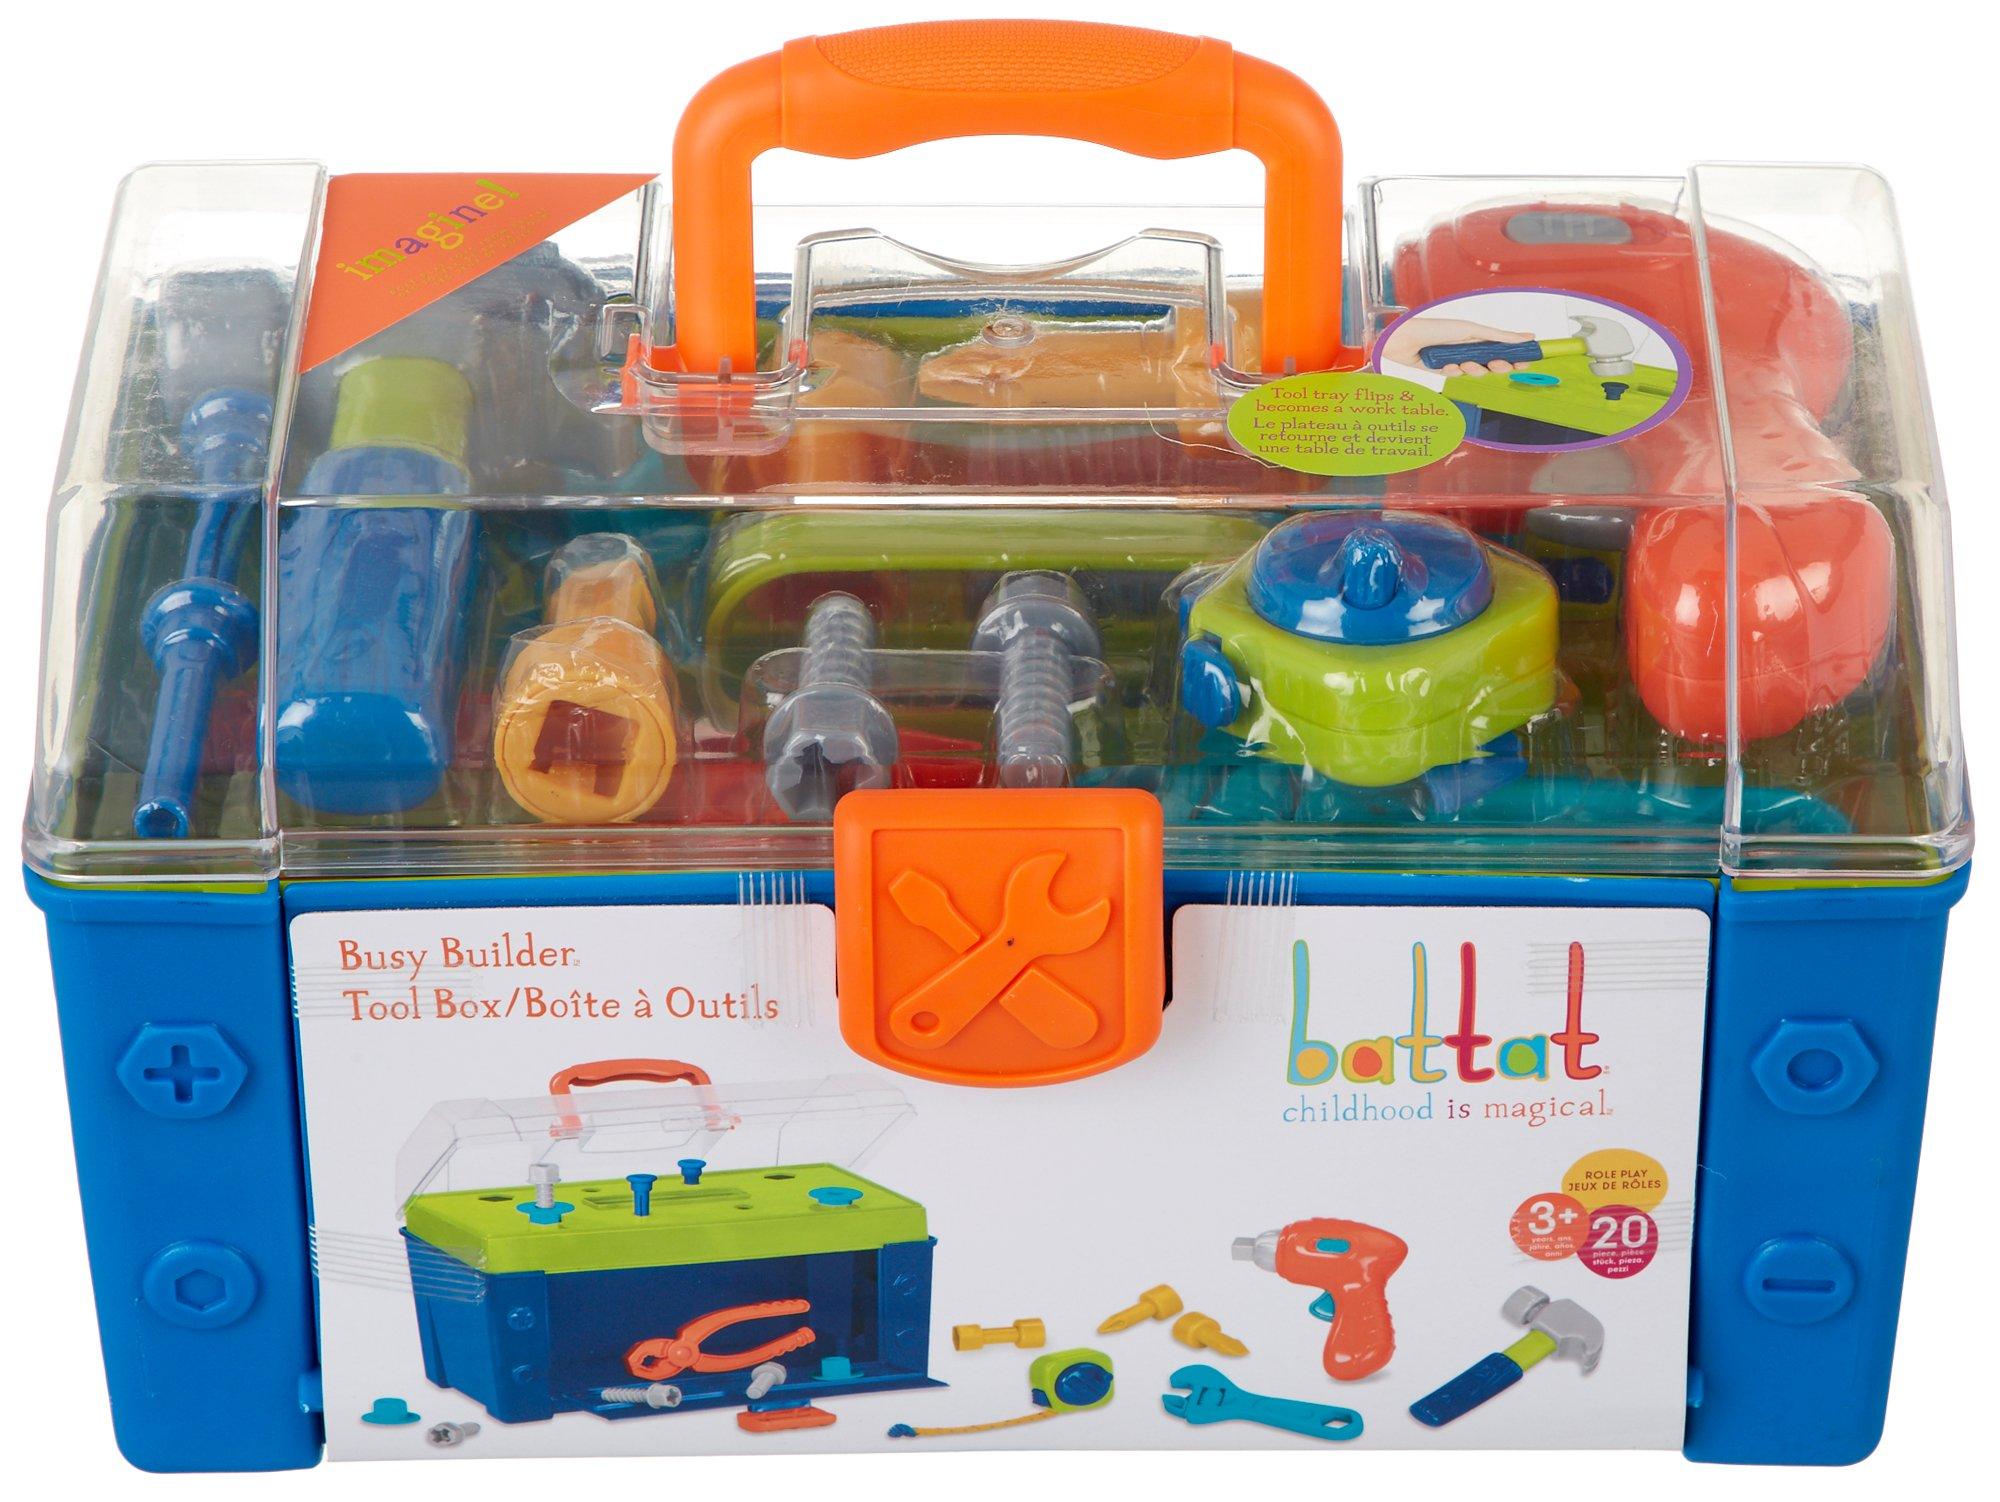 Busy Builder Toy Tool Box